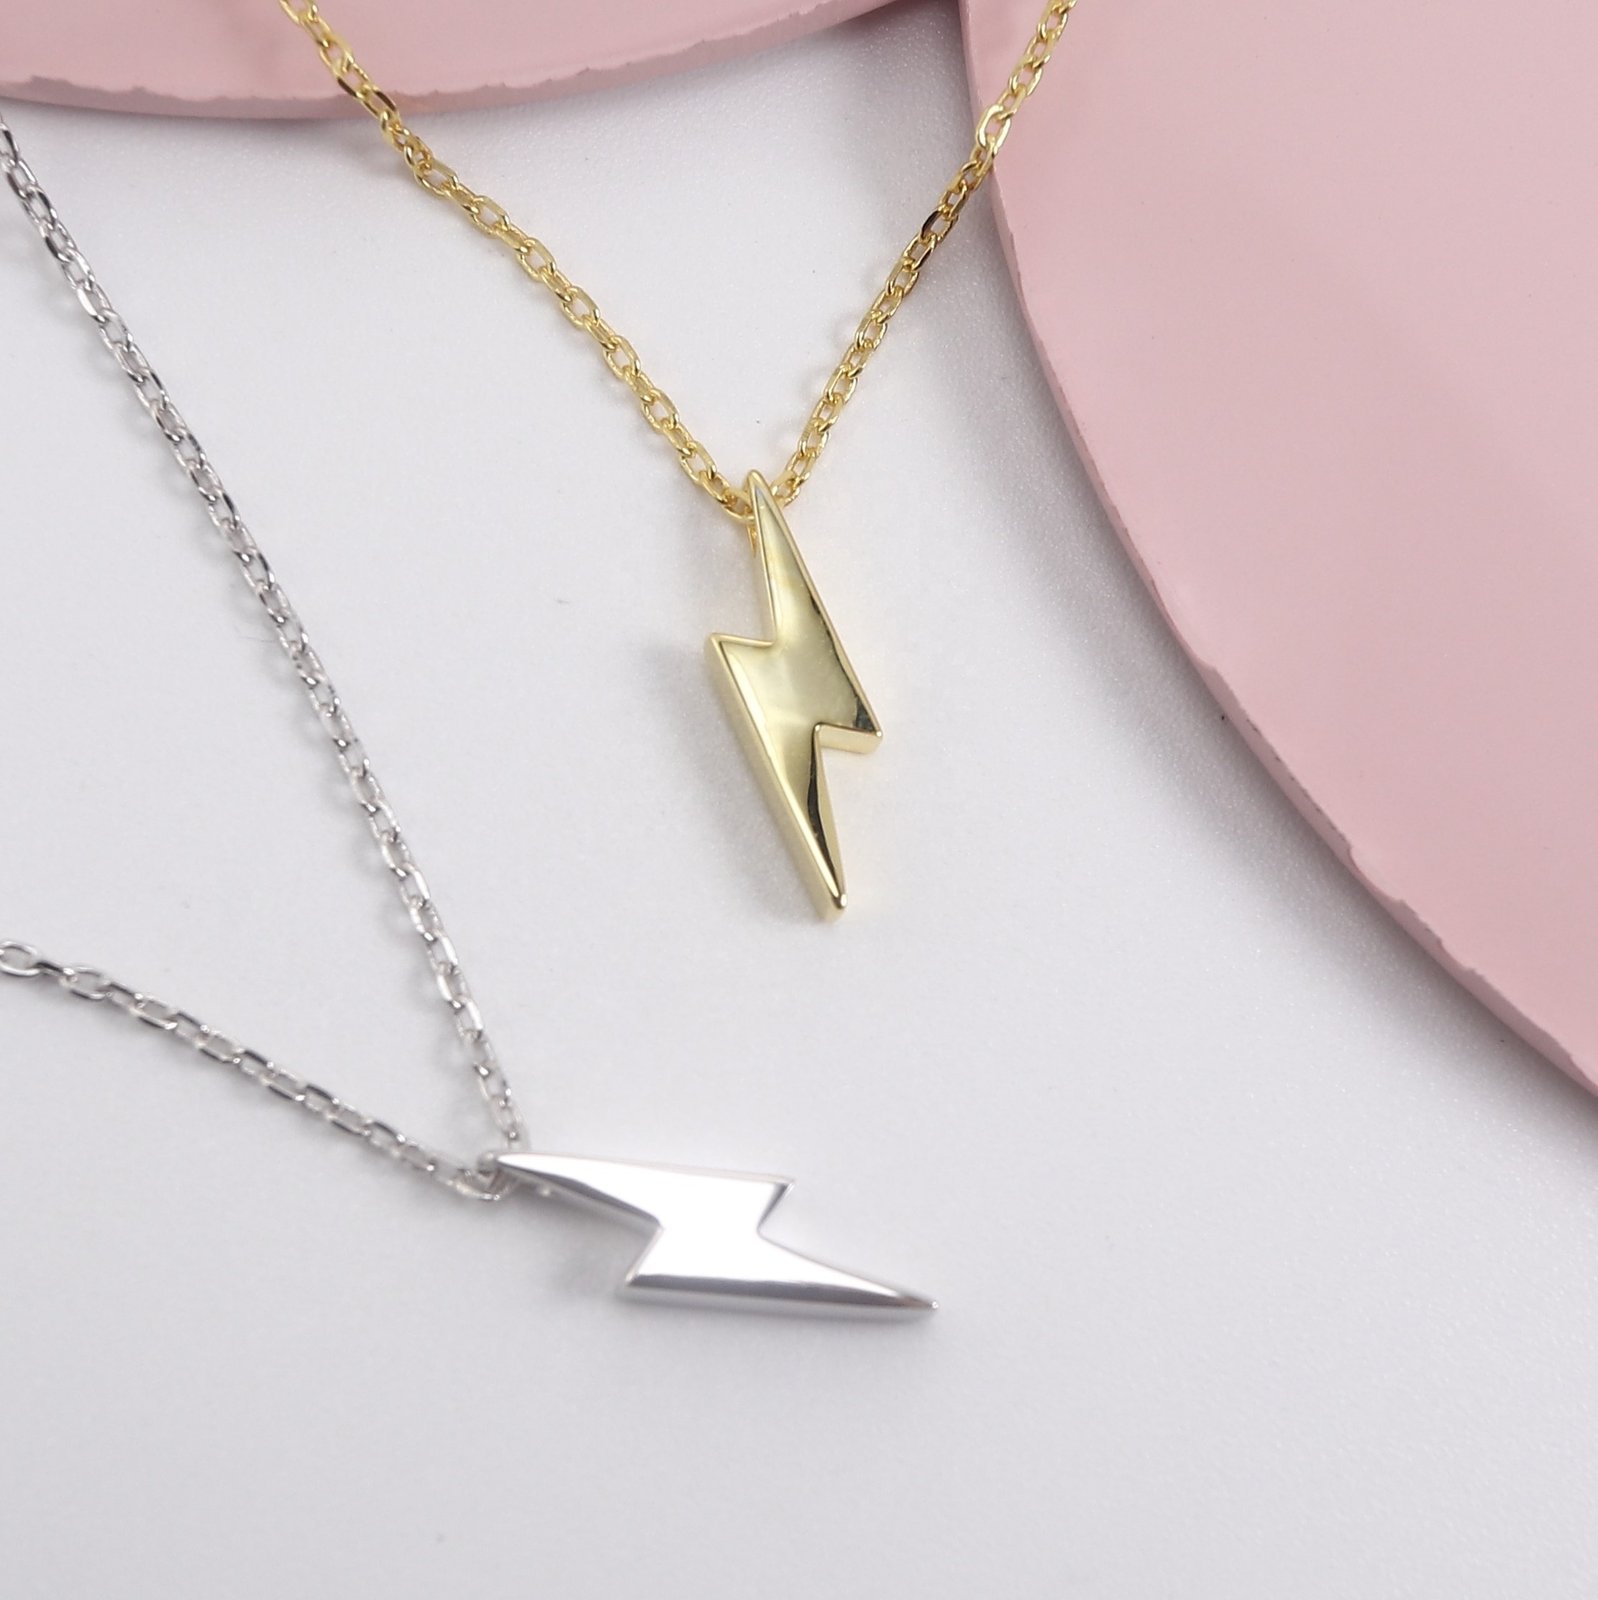 Jewels Obsession Lightning Bolt Necklace Rhodium-plated 925 Silver Lightning Bolt Pendant with 16 Necklace 